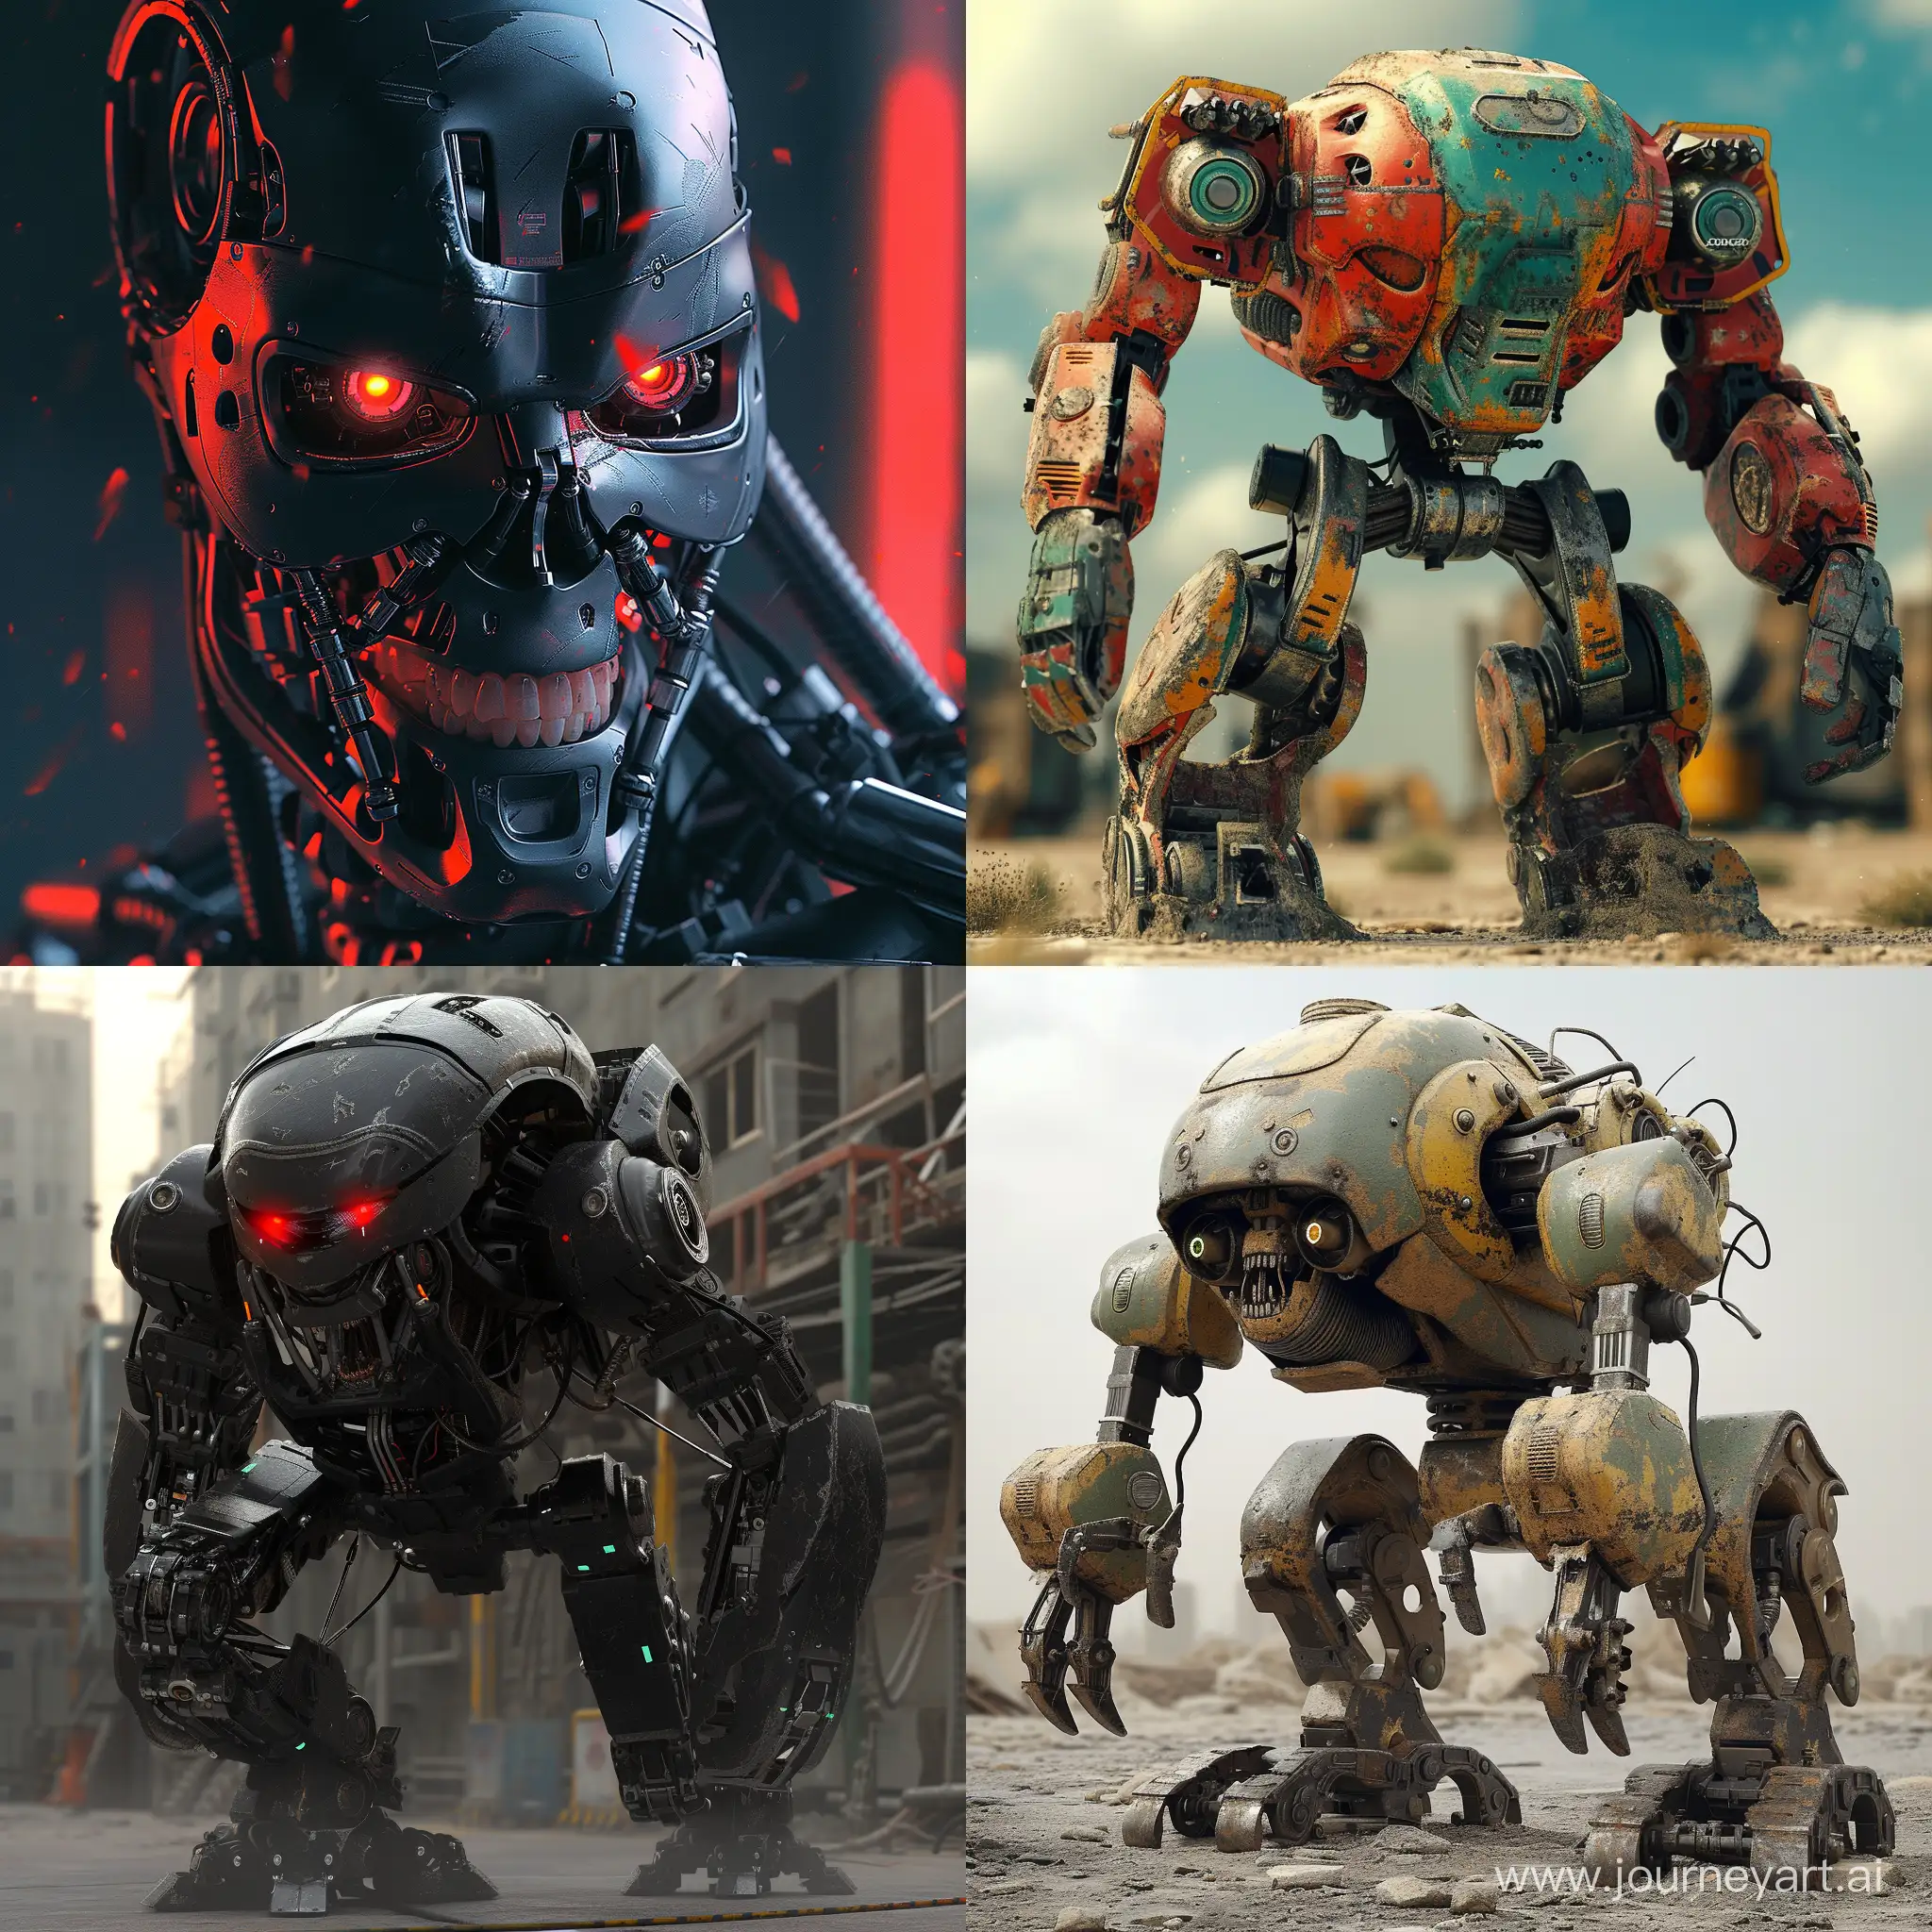 Furious-Robot-Rampage-in-PostApocalyptic-2450